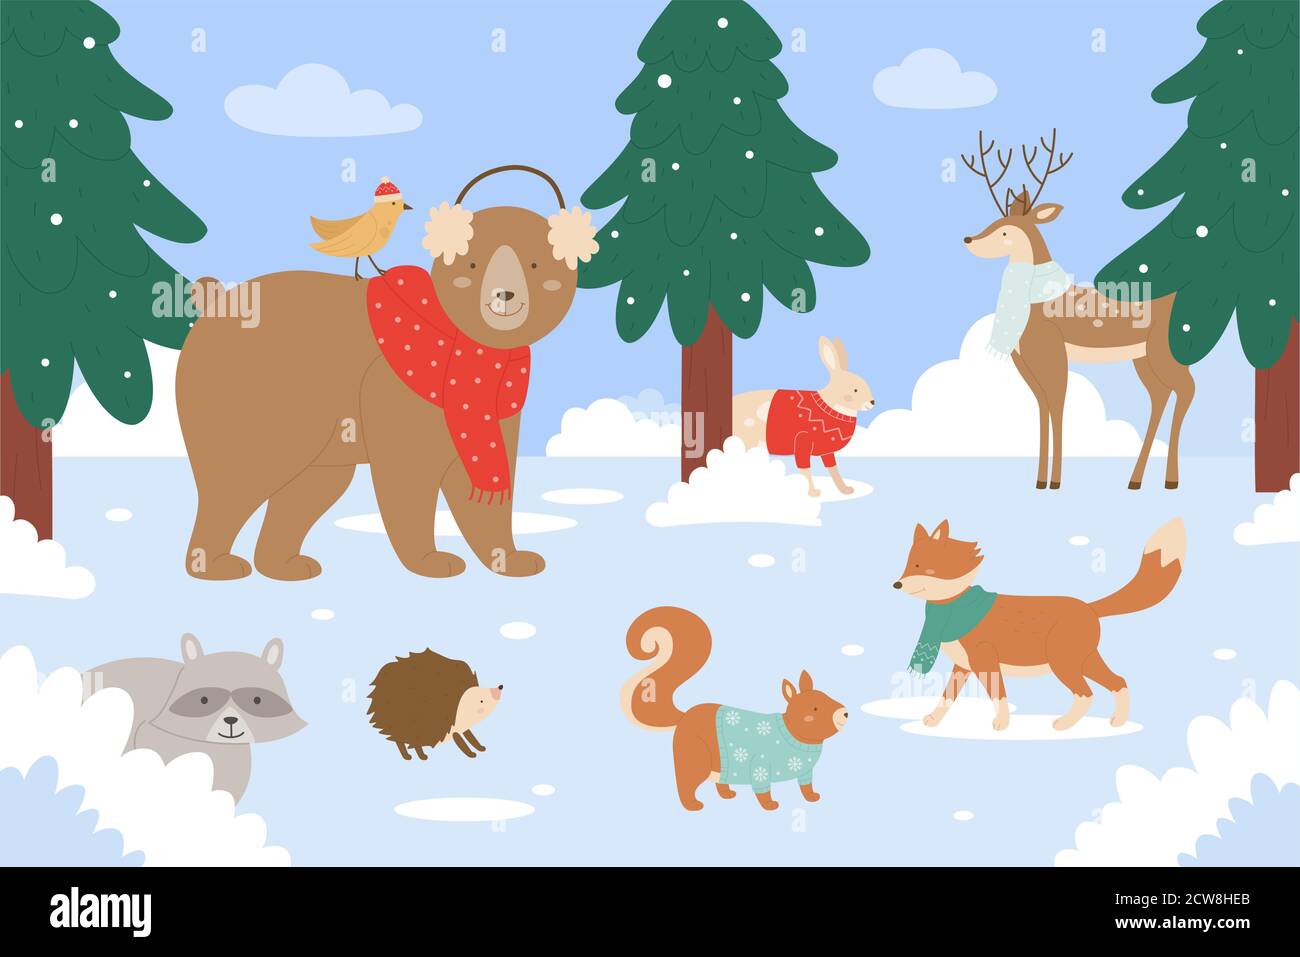 Animals In Winter Forest Vector Illustration Cartoon Flat Cute Animalistic Group Of Characters Wearing Scarf Or Sweater Standing Together In Wild Snow Nature Woods Landscape Wintertime Background Stock Vector Image Art